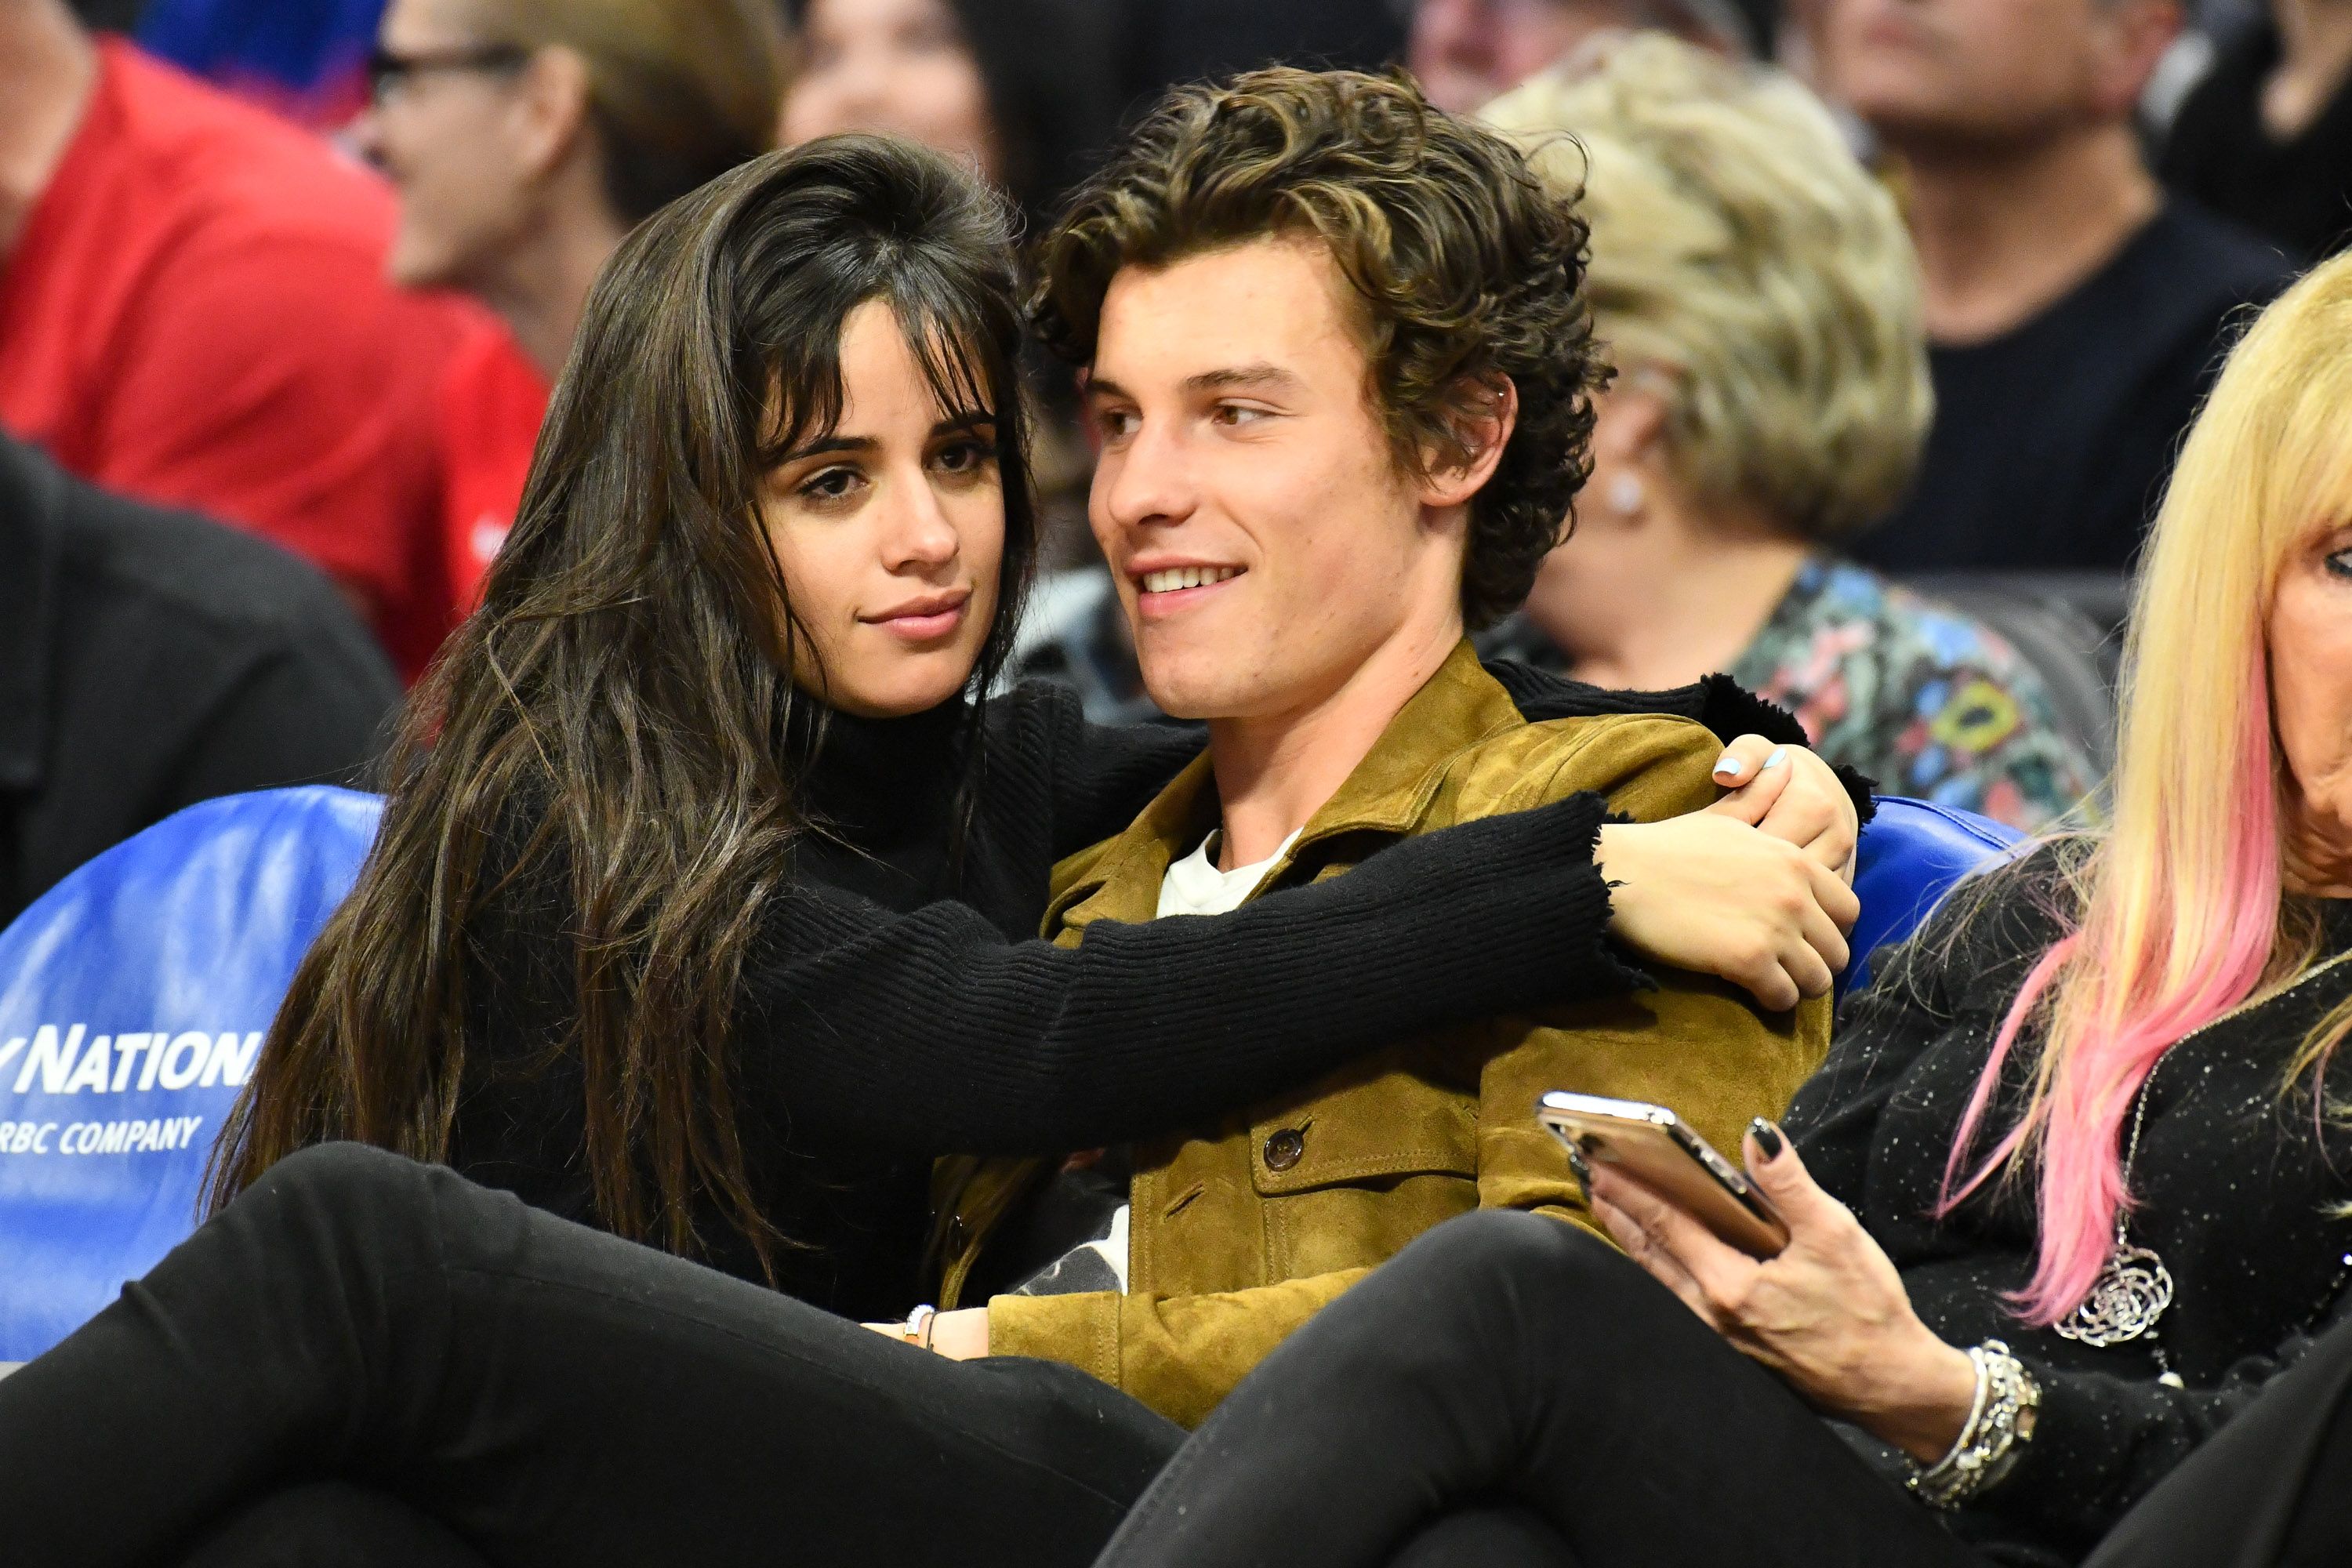 Cabello ‘collaborating’ with Mendes ‘on life’